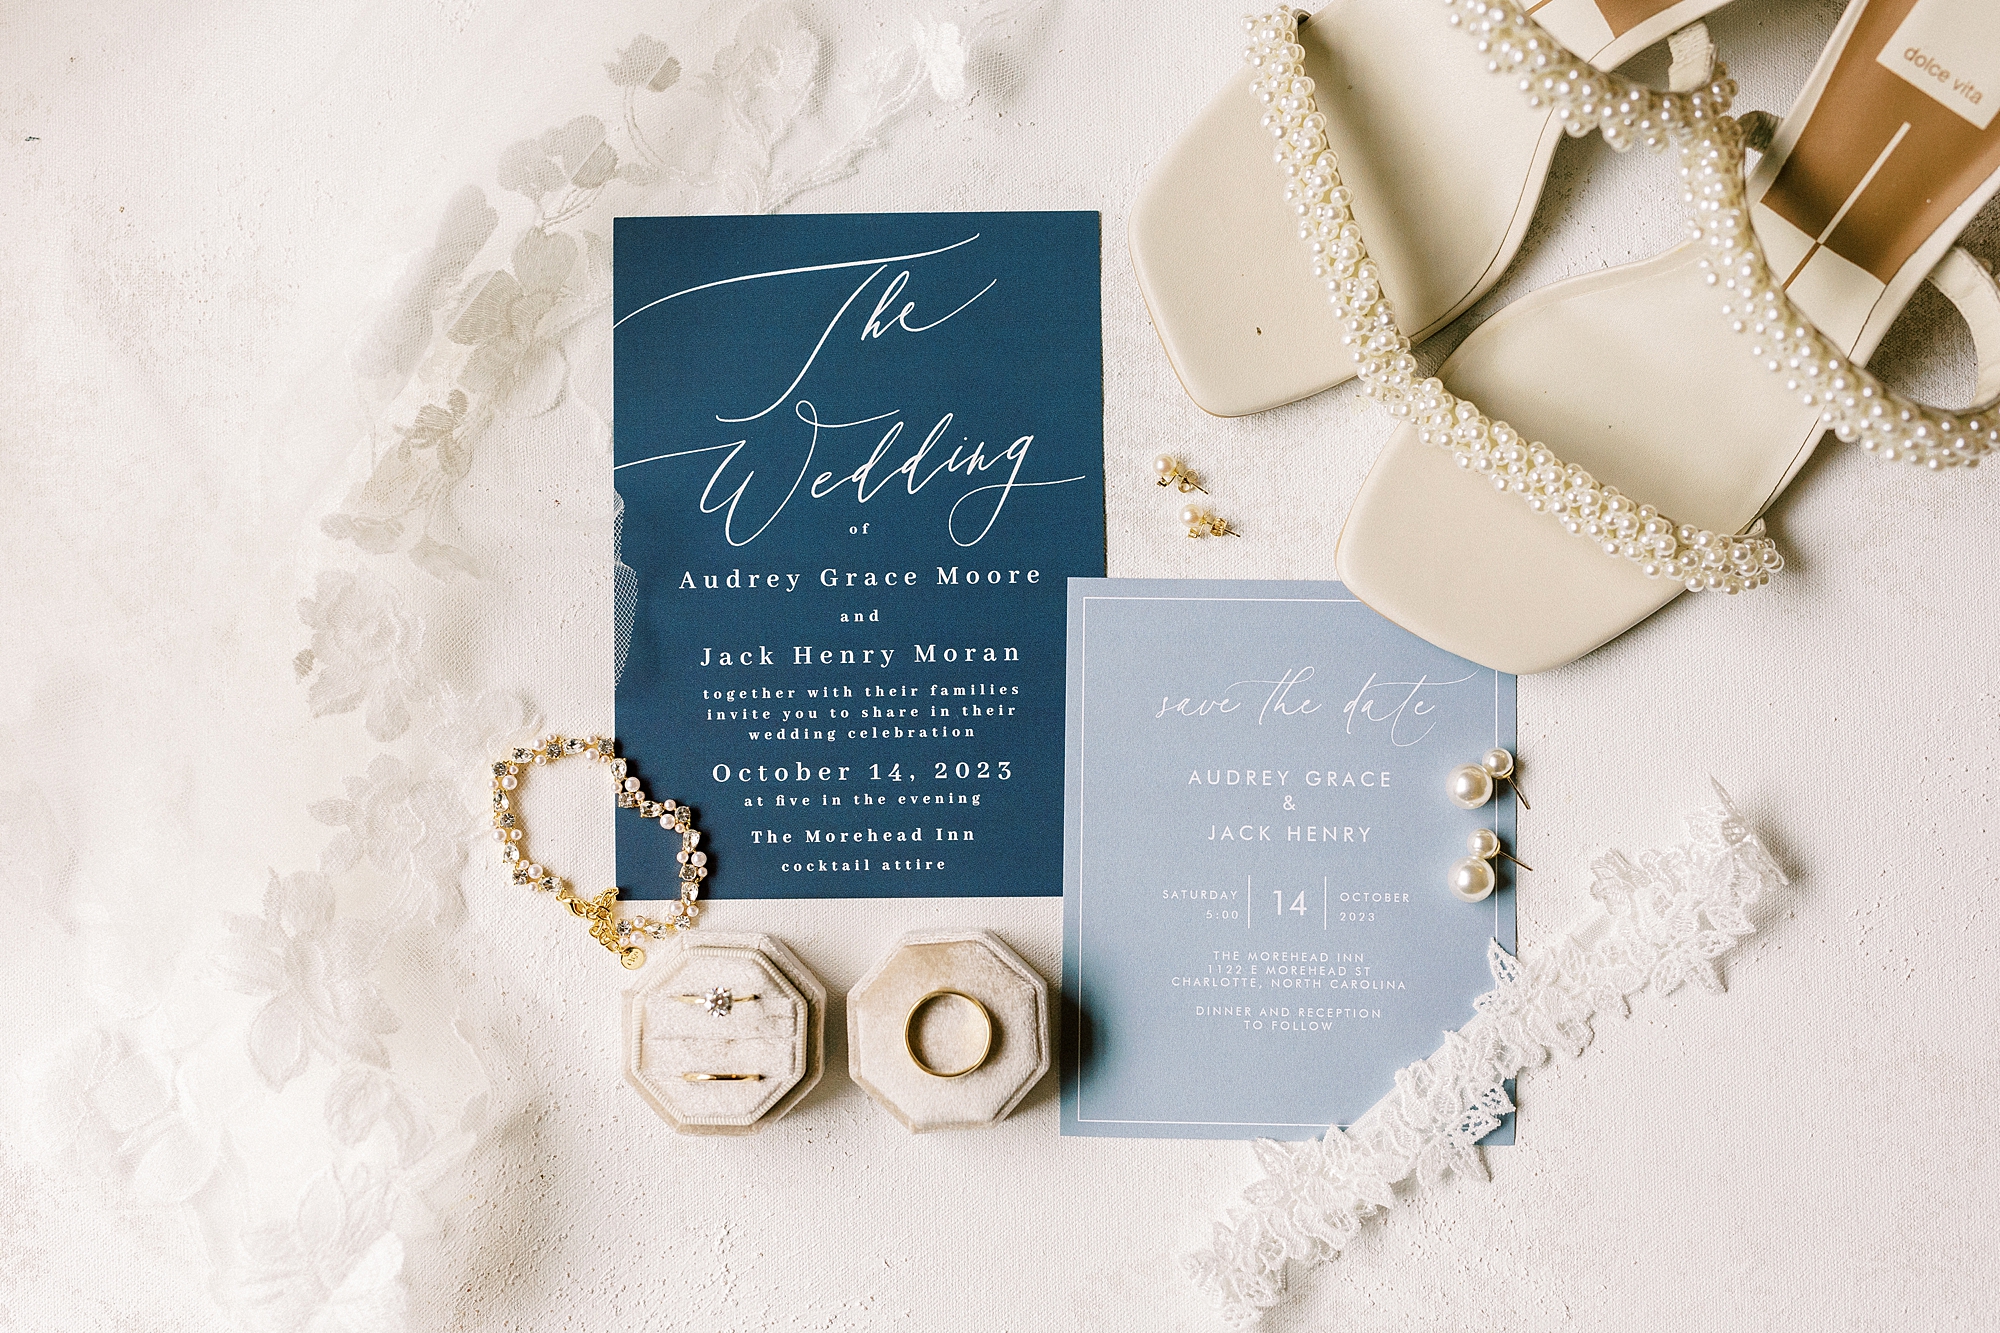 light blue stationery set and bride's jewelry for fall wedding at The Morehead Inn